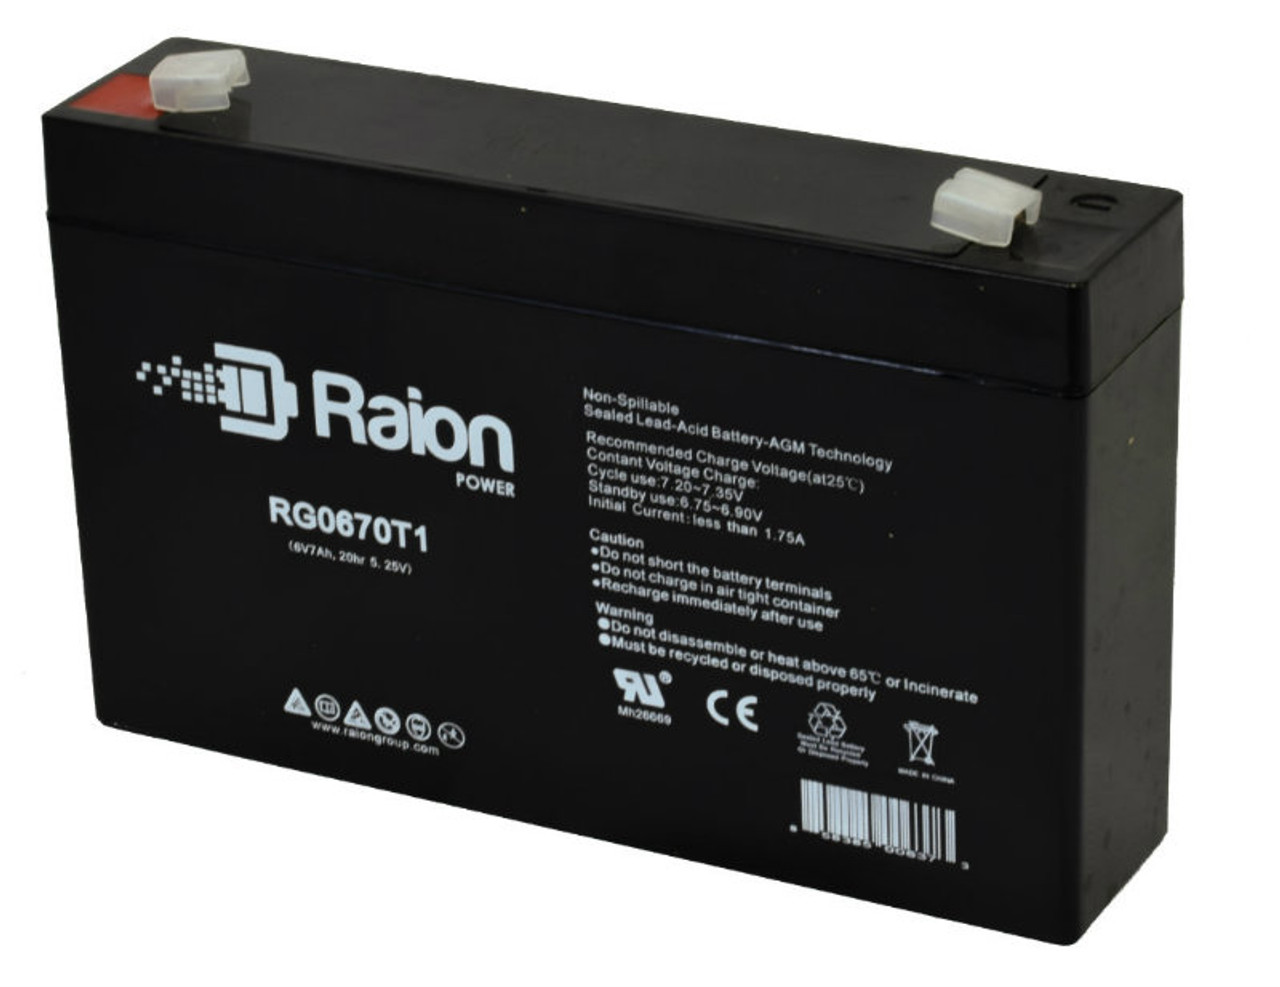 Raion Power RG0670T1 Replacement Battery for Toyo Battery 3FM8 OEM Battery